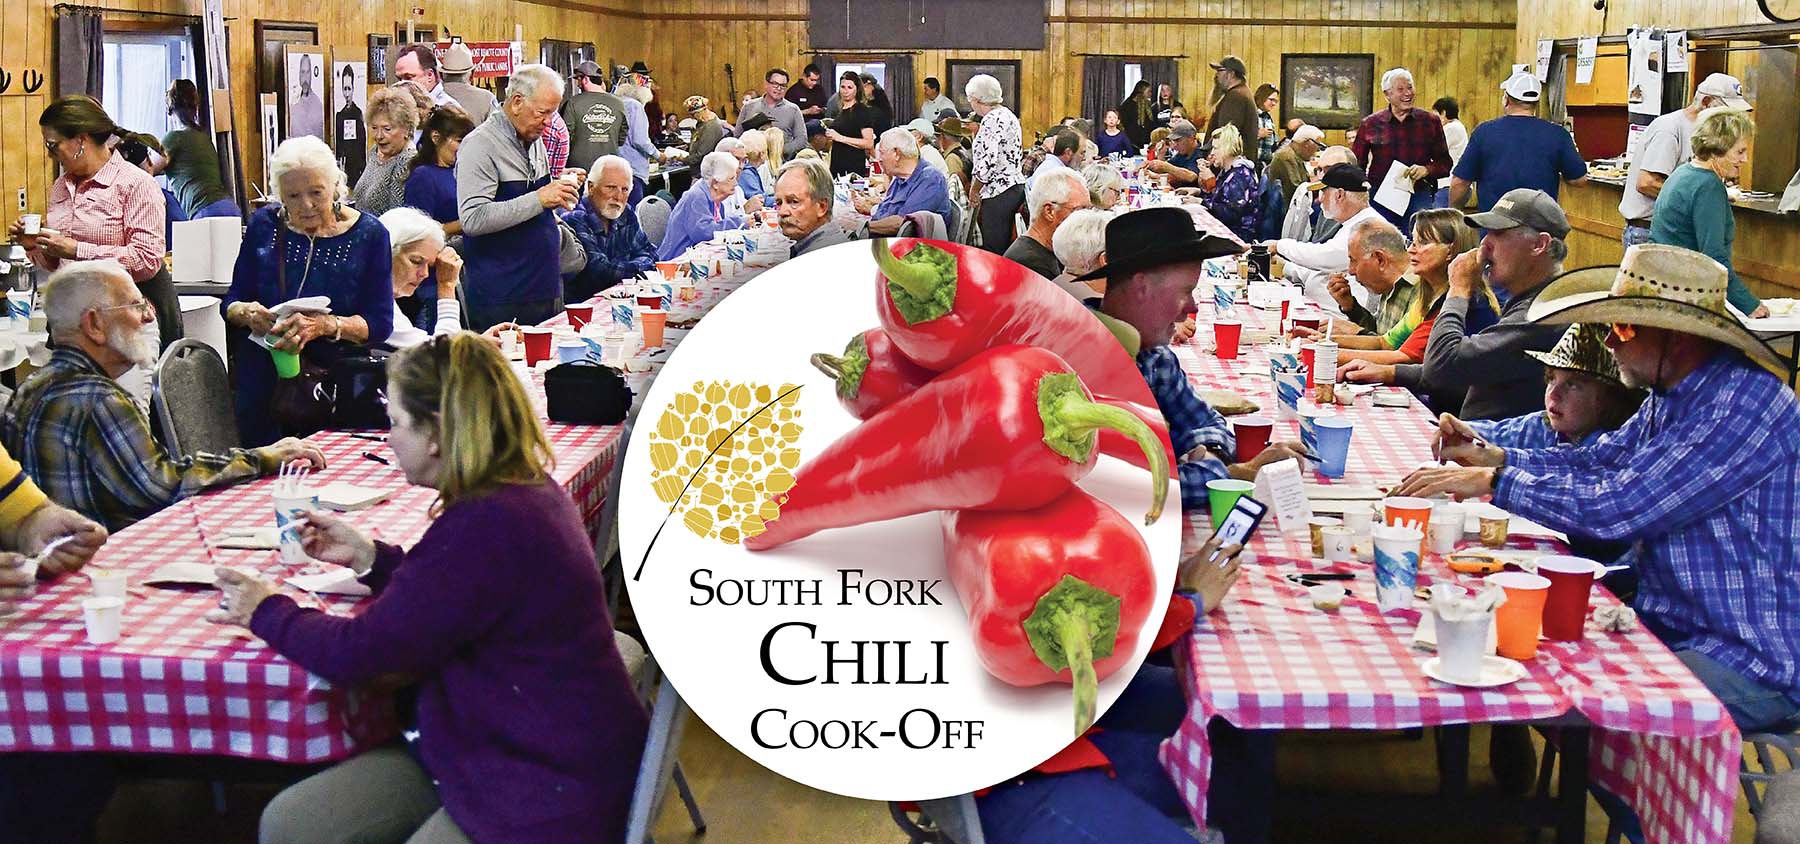 South Fork Chili Cook Off